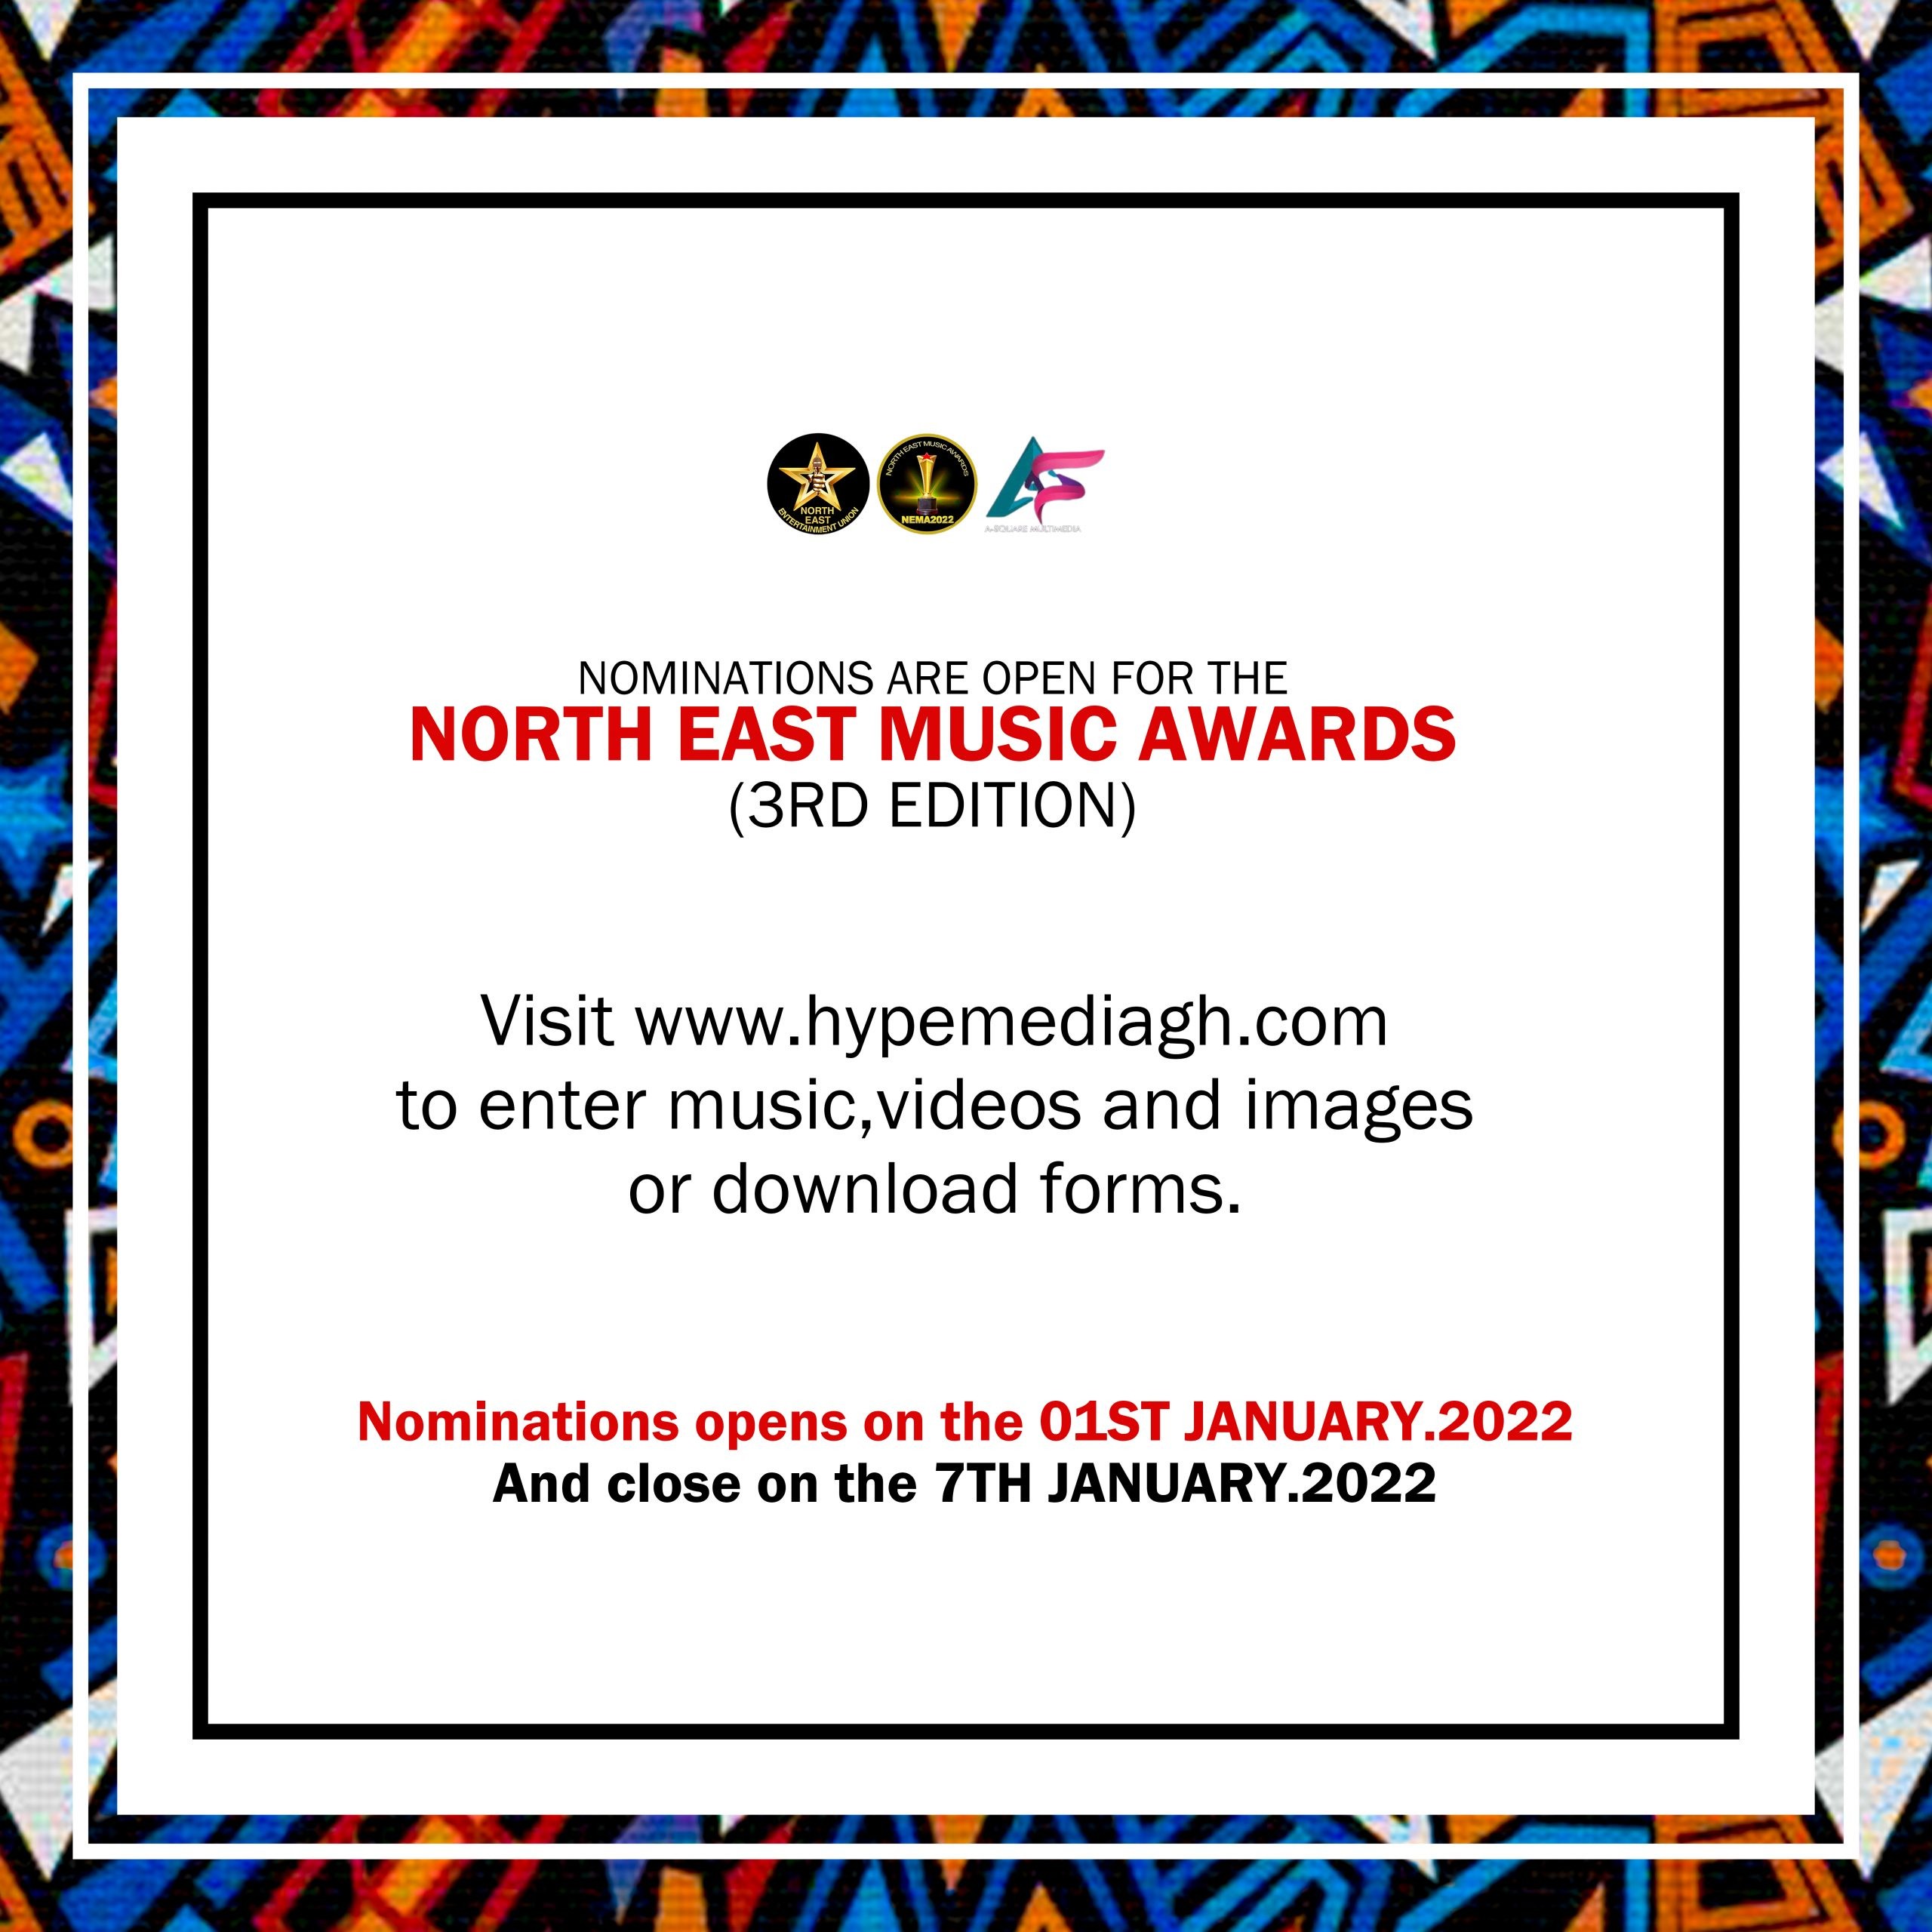 File Here: The Entry Form For The North East Music Awards Industry Categories Is Now Available